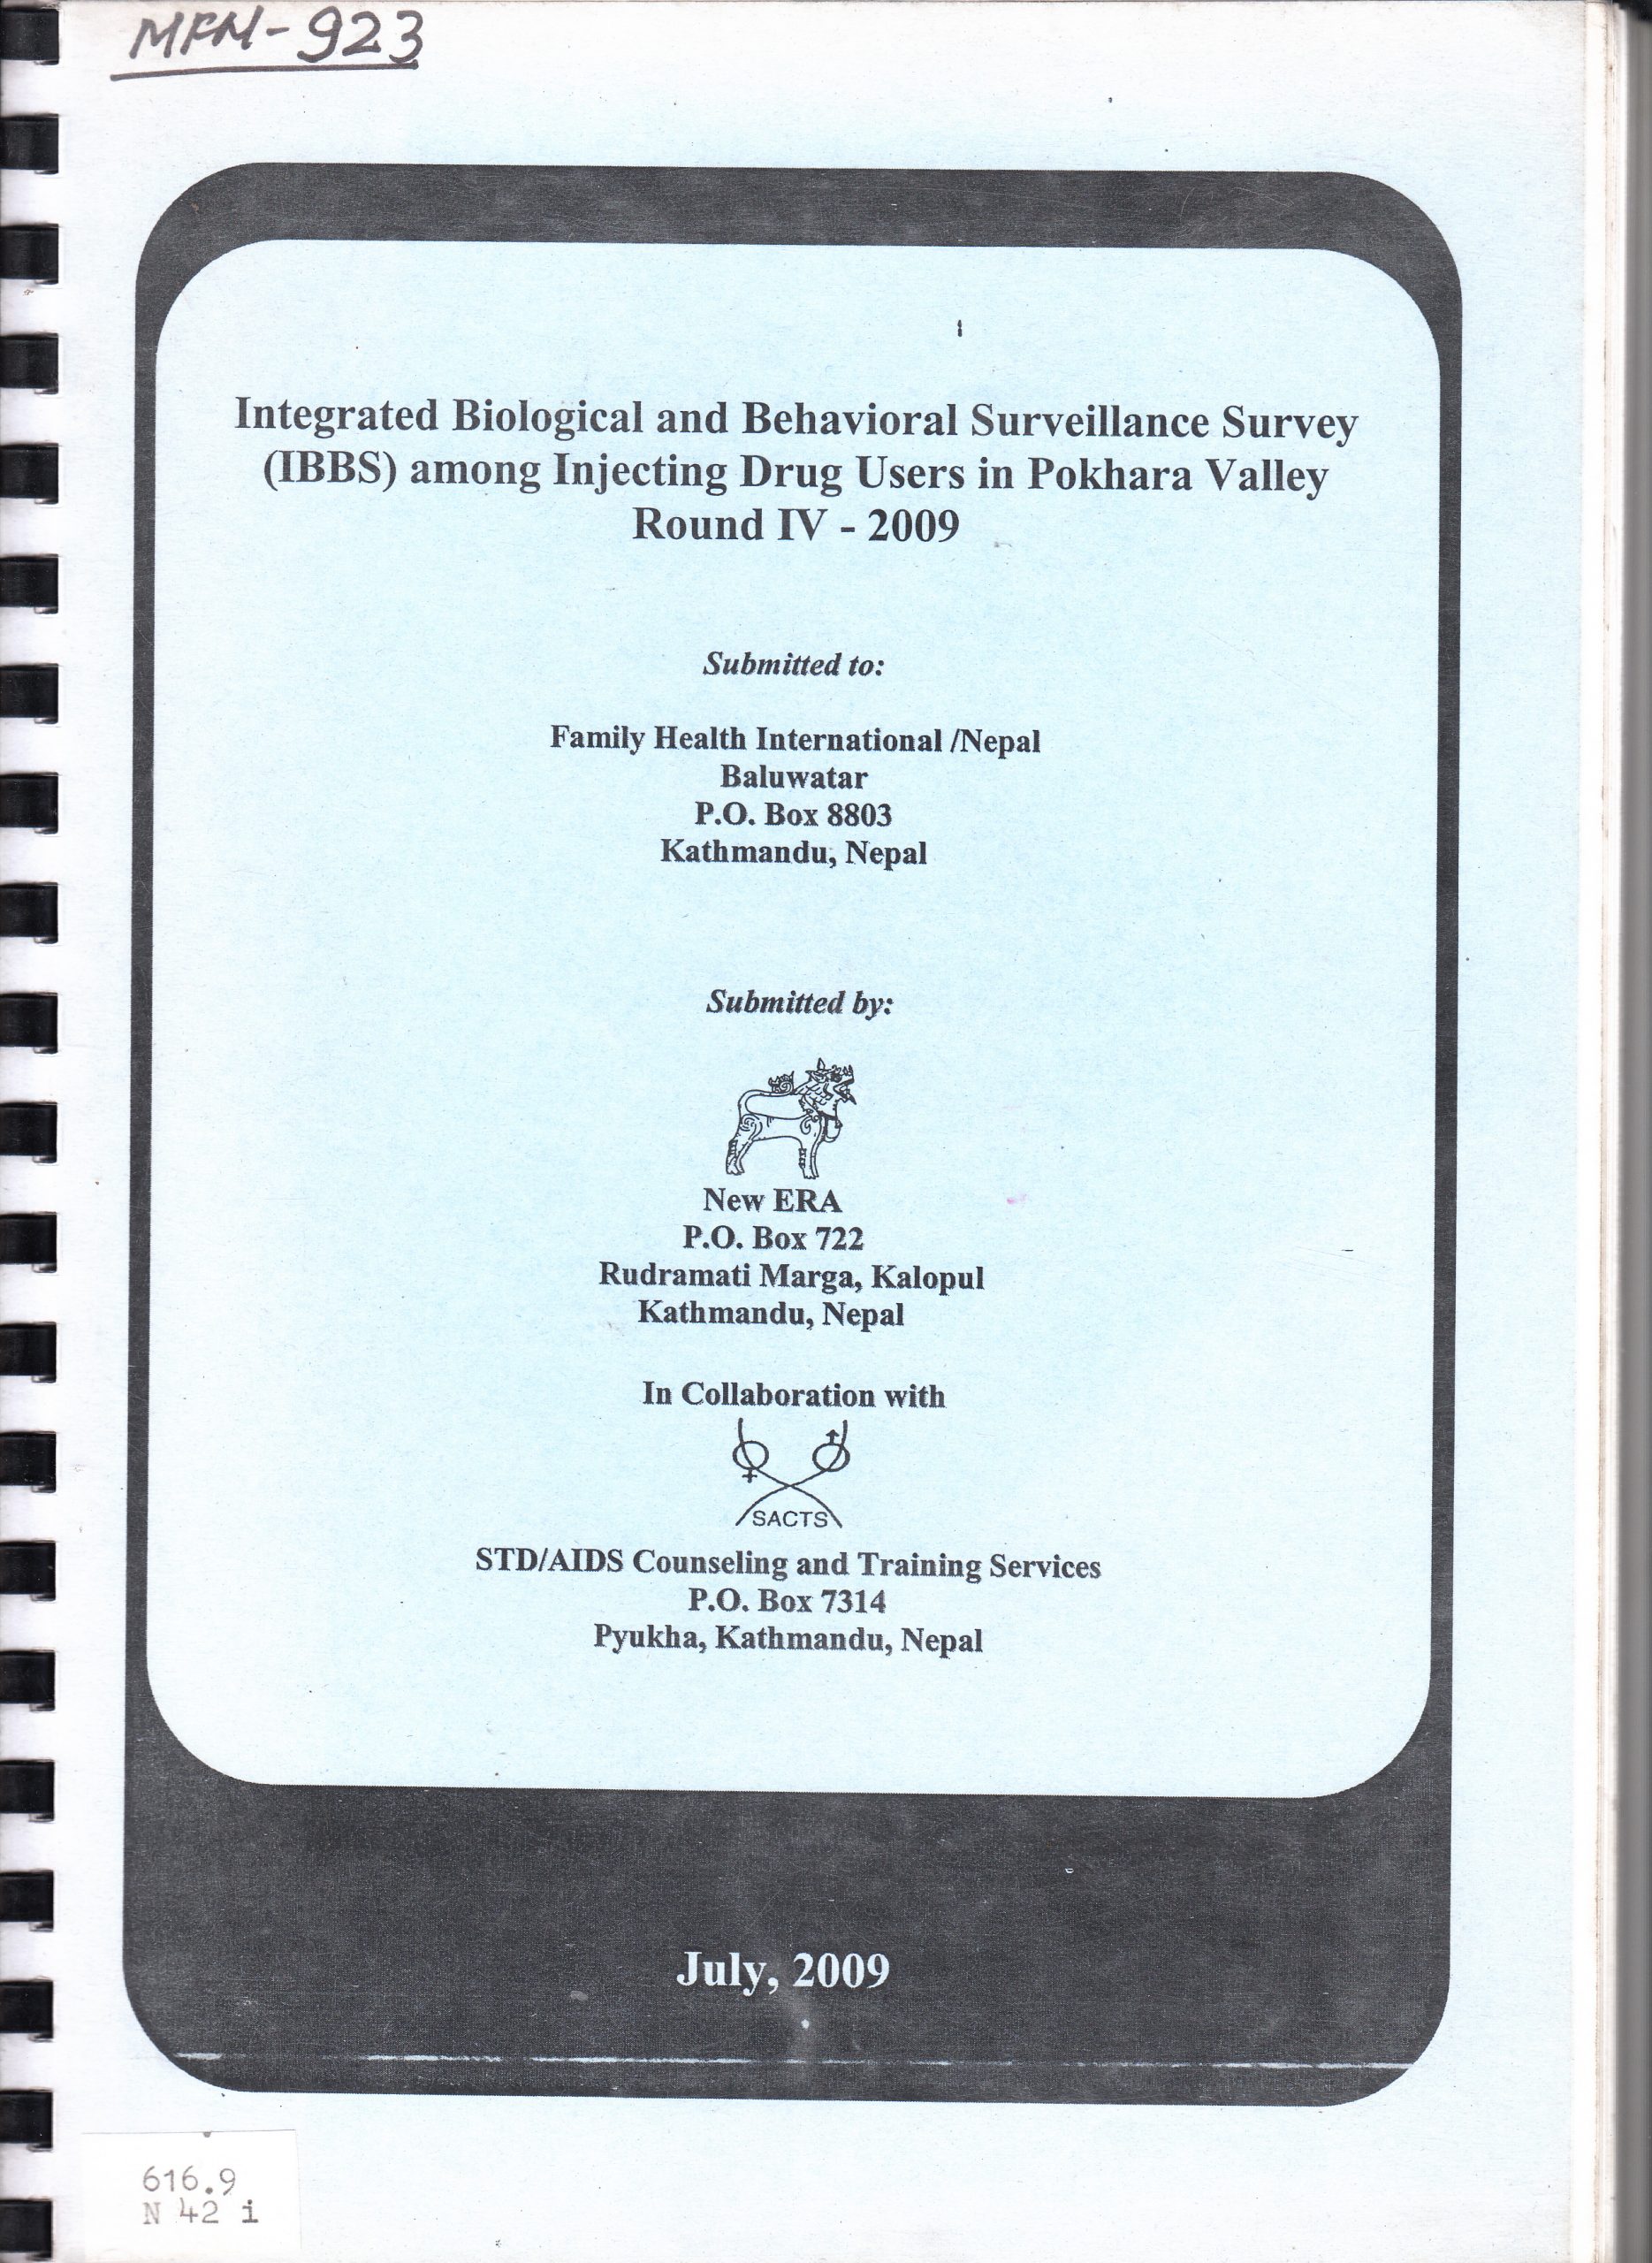 Integrated Biological and Behavioral Surveillance Survey (IBBS) among Injecting Drug Users (IDUs) in Pokhara Valley, Round IV–2009